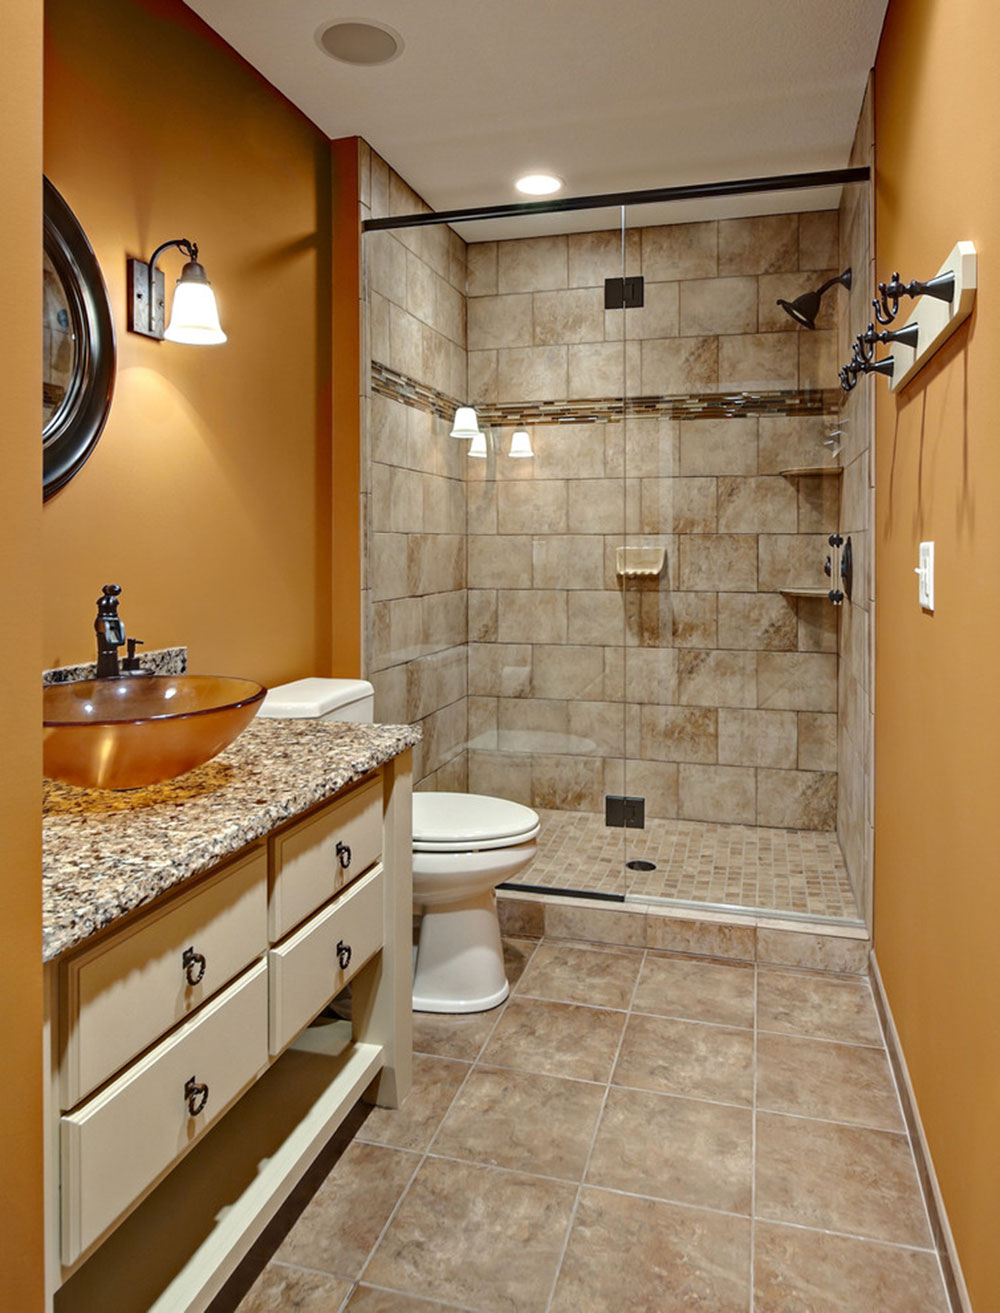 How Much Does It Cost To Add A Bathroom In The Basement Answered - How Much Value Does Adding A Basement Bathroom Add